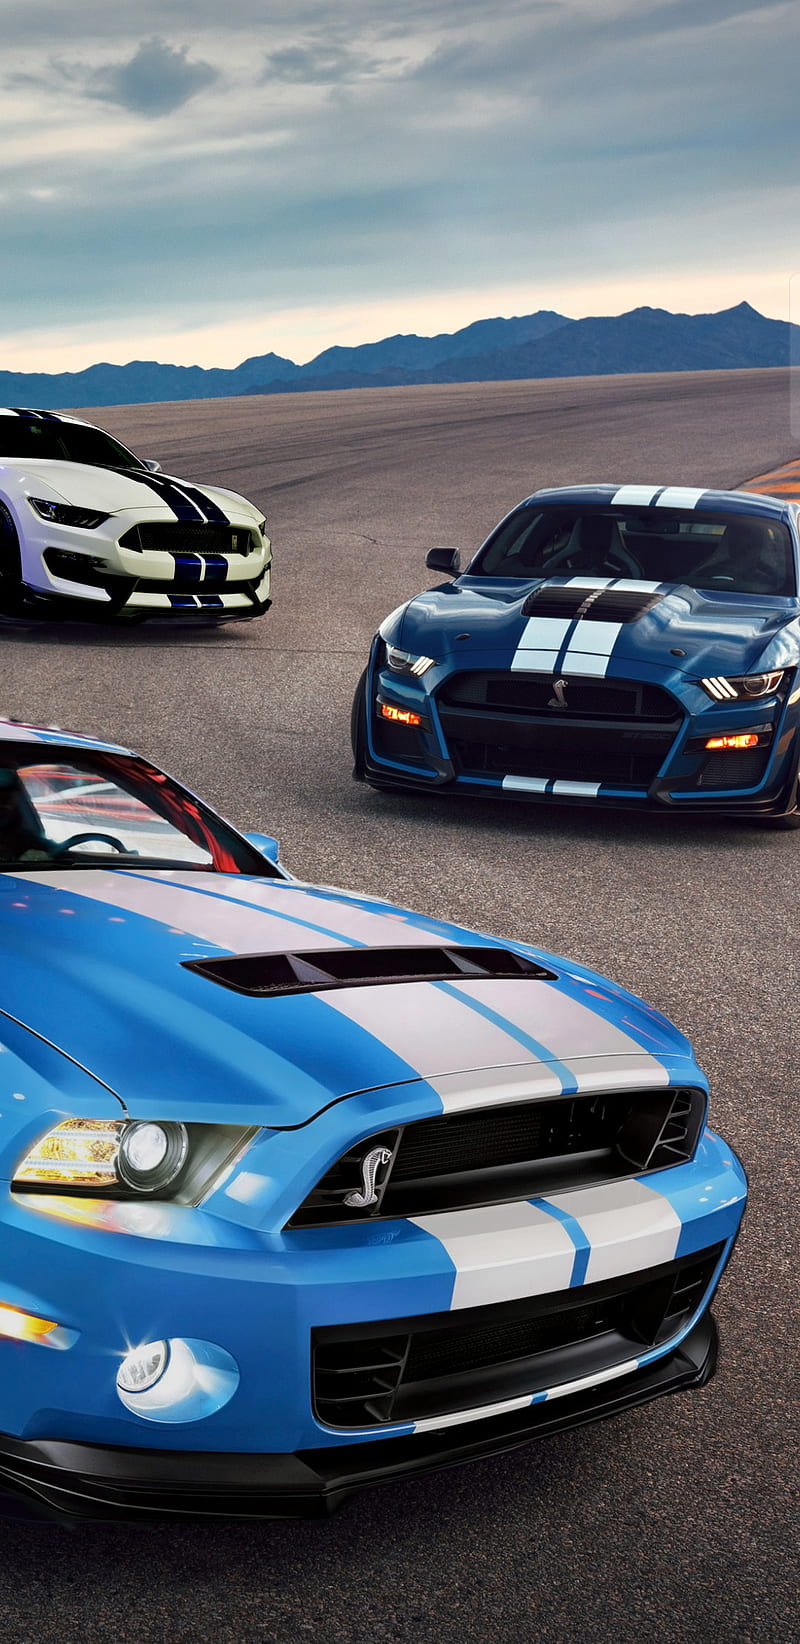 Mustang, ford, gt500, mustang gt500, shelby, shelby gt500, shelby mustang, HD phone wallpaper